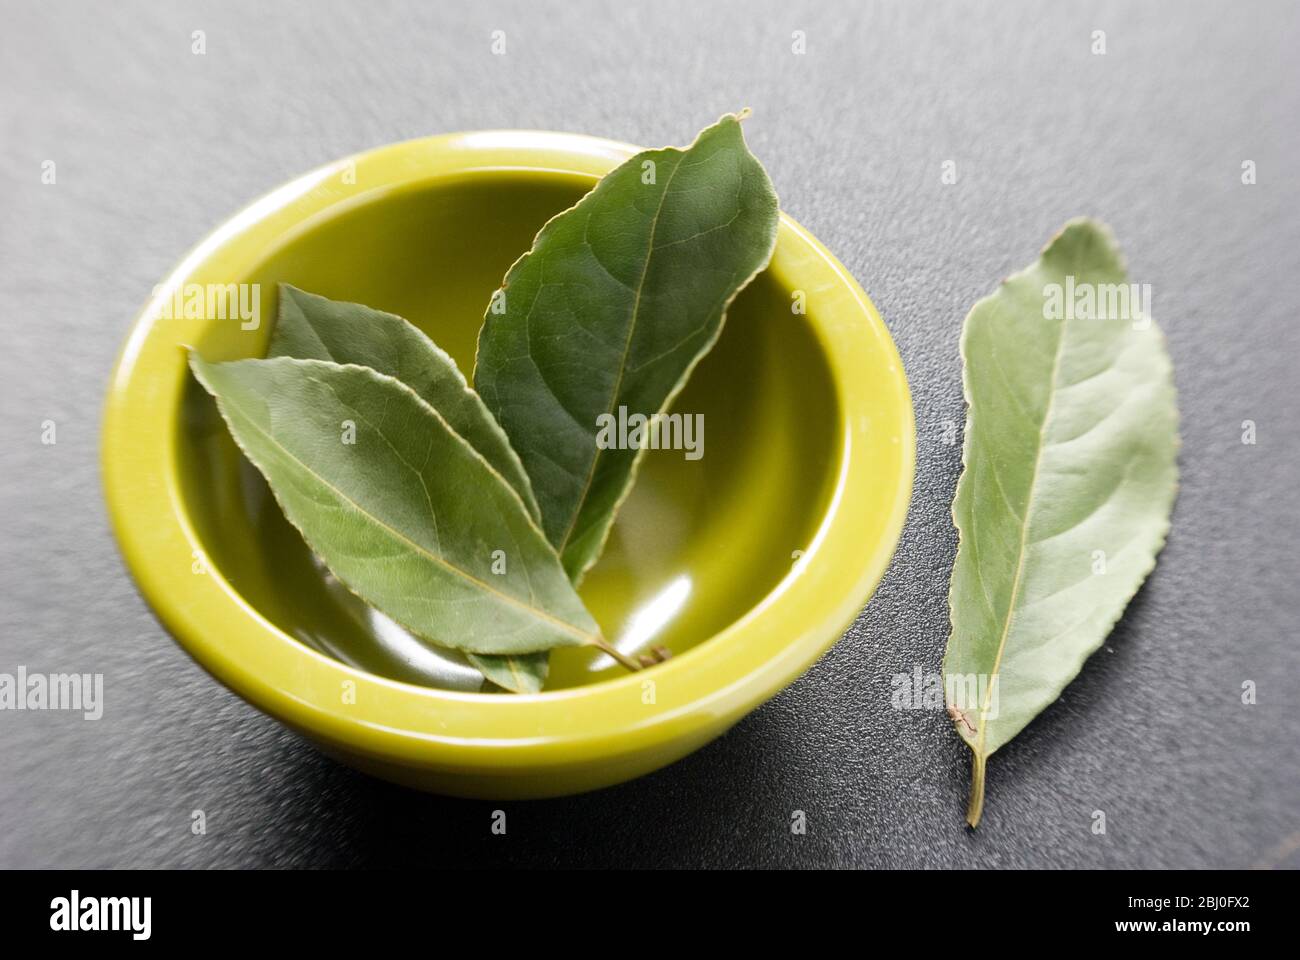 Bay leaves with small bowl on a dark plastic surface. Bay leaf (Greek Daphni, Romanian Foi de Dafin) is the aromatic leaf of several species of the La Stock Photo